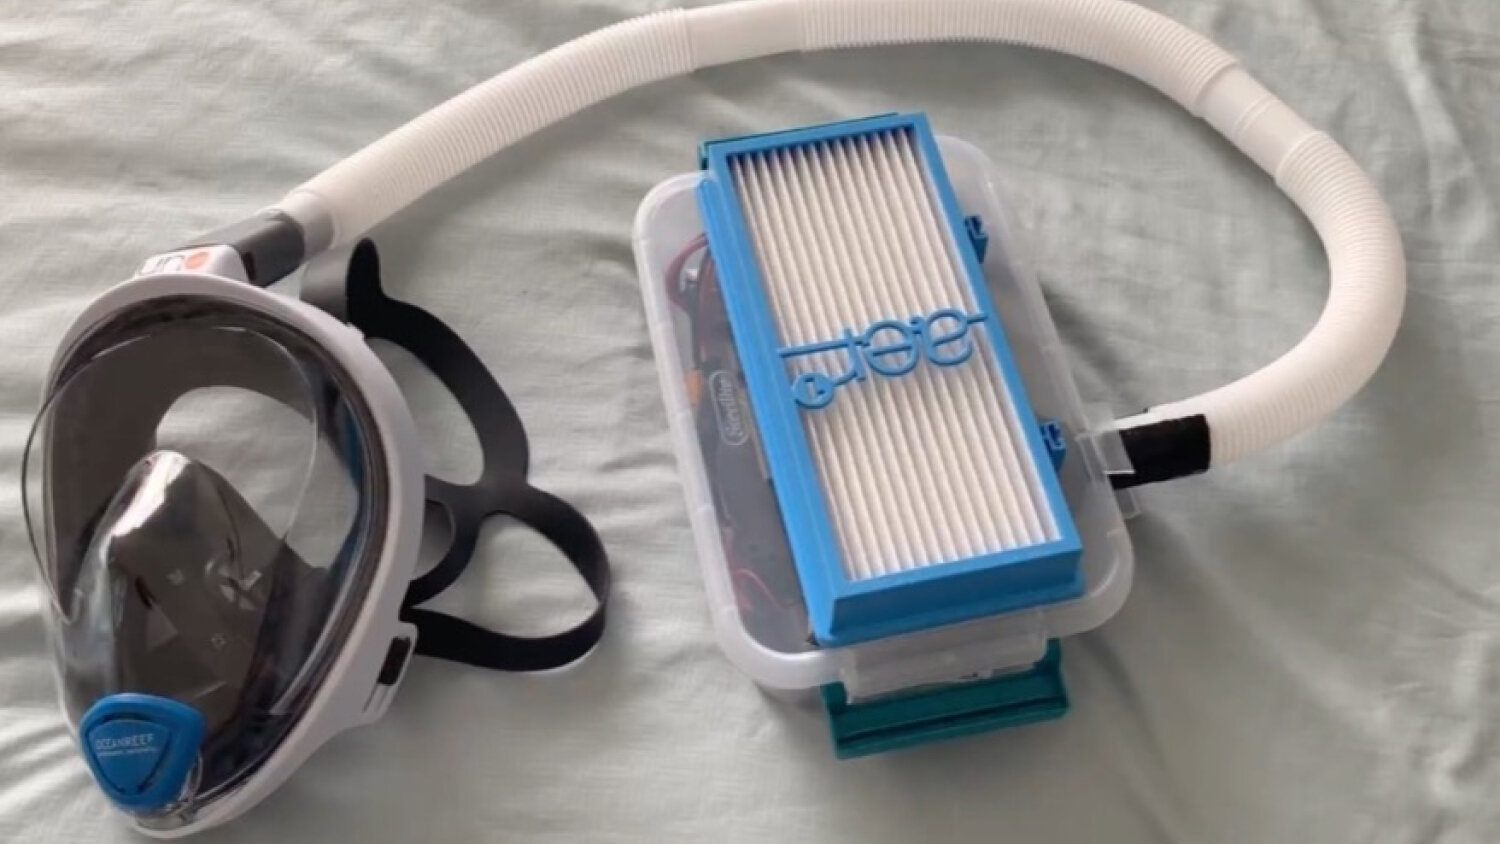  Powered Air-Purifying Respiratory (PAPR) Device (PPE for clinicians) 